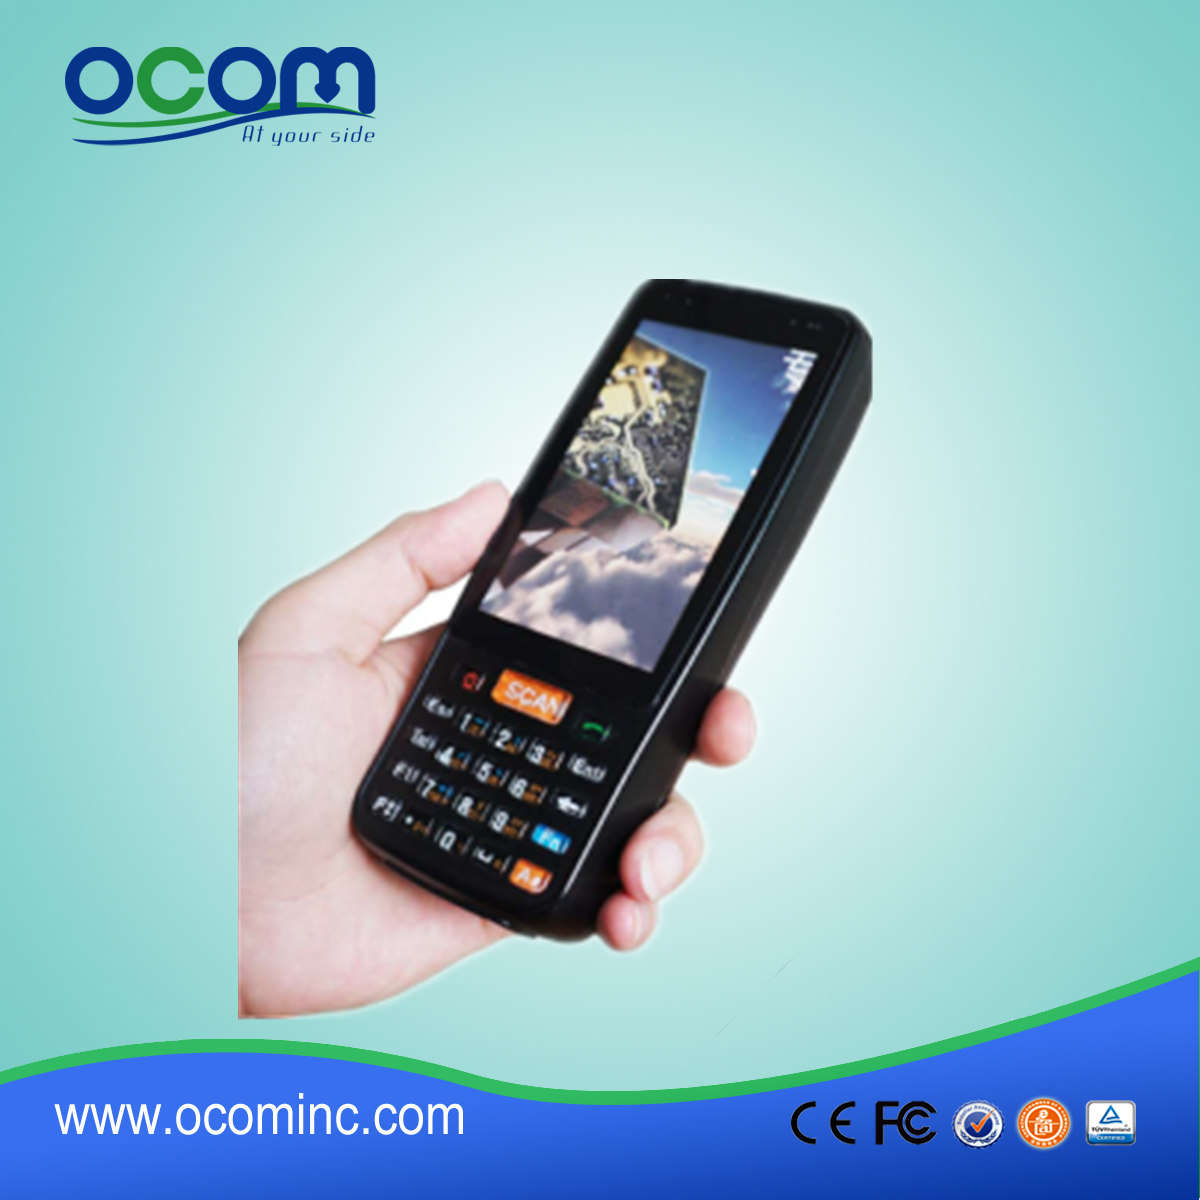 OCBS-D4000 Industrial Barcode Scanner PDA with Android OS